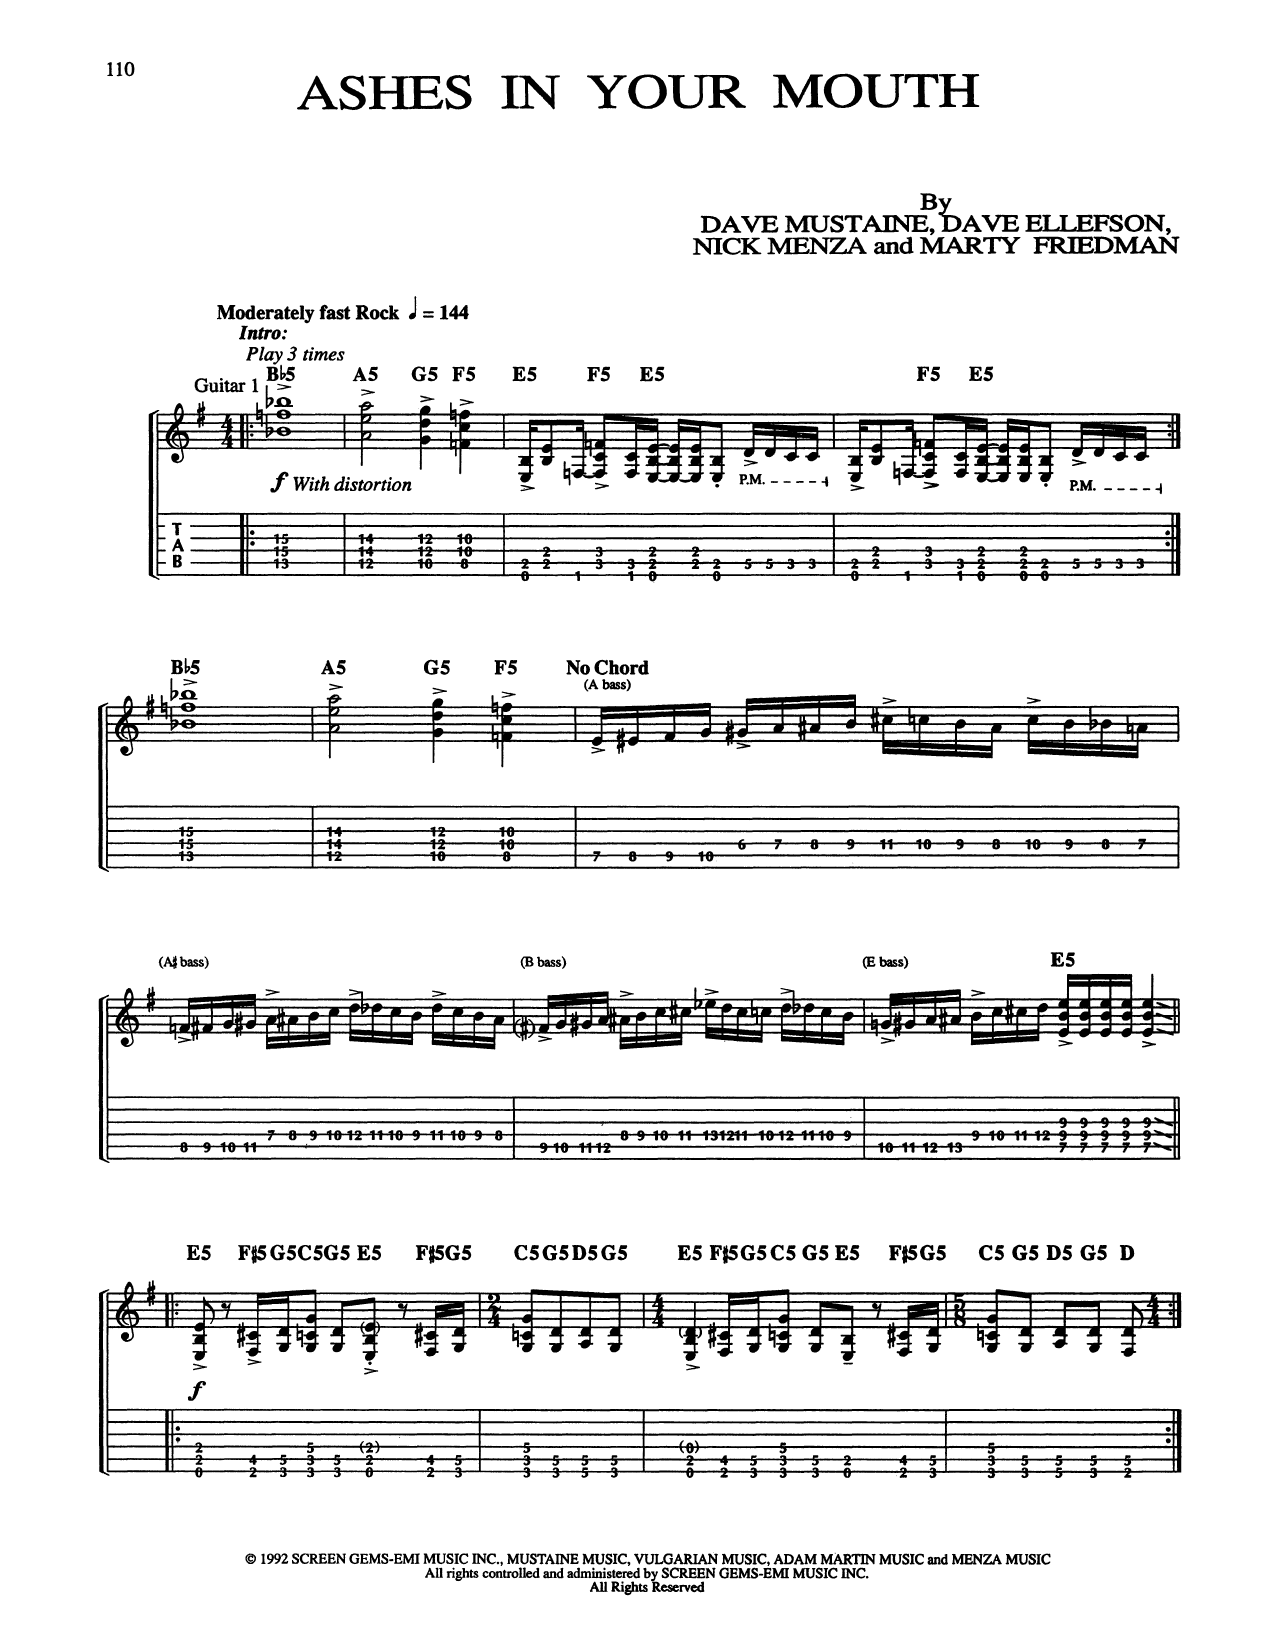 Download Megadeth Ashes In Your Mouth Sheet Music